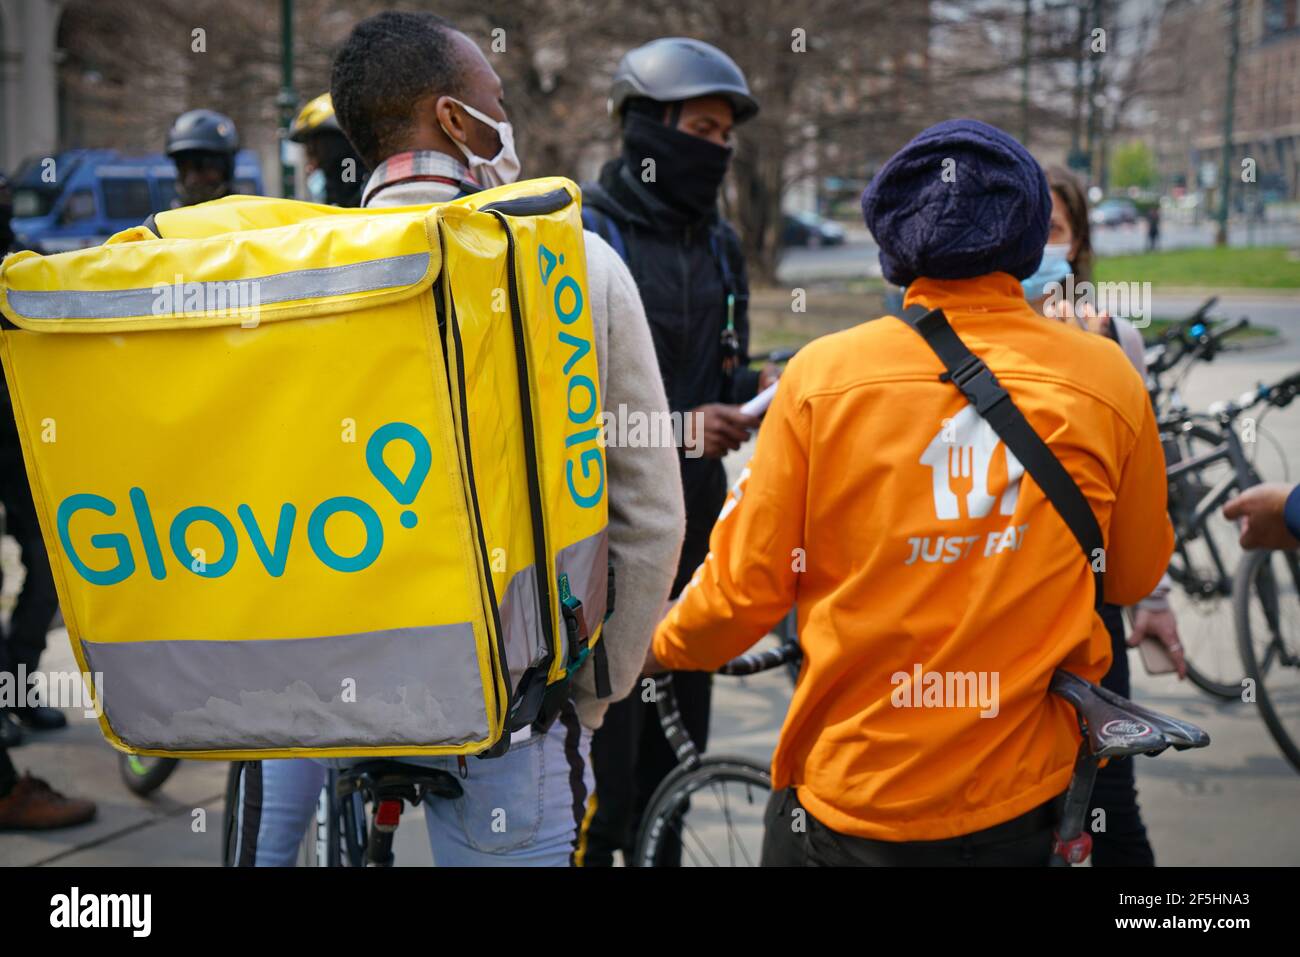 Bicycle food delivery riders protest against working conditions. Turin, Italy - March 2021 Stock Photo